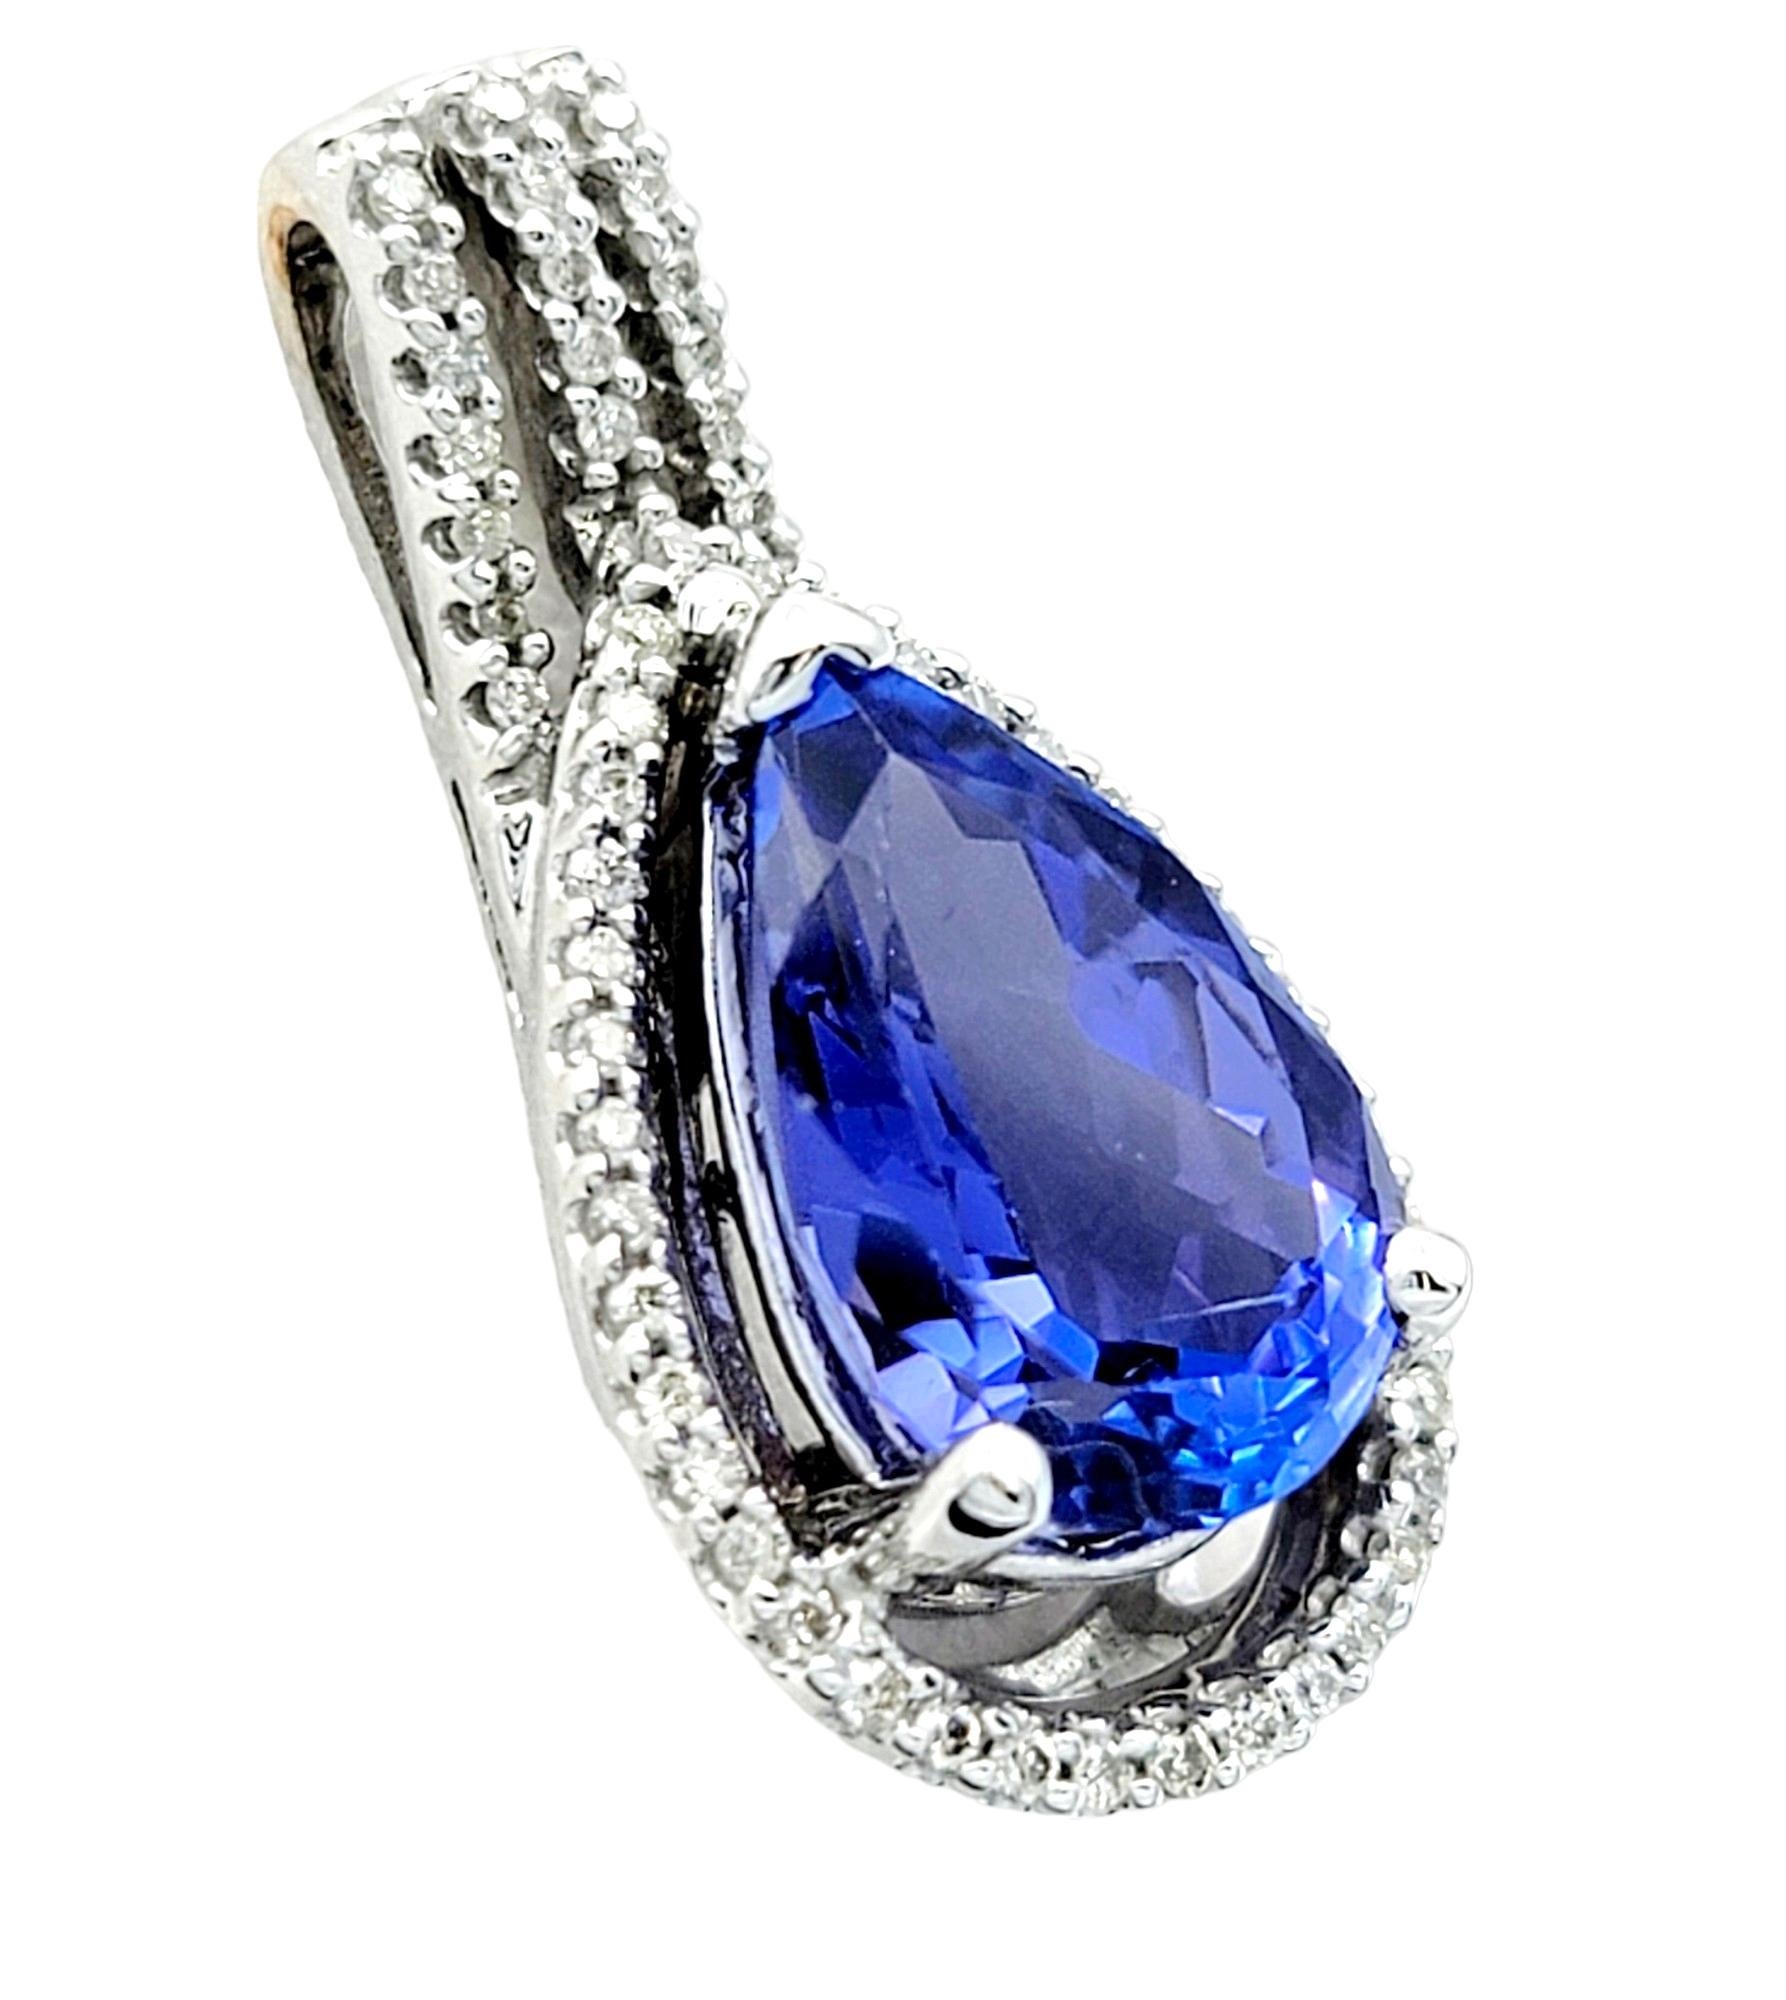 This enchanting pendant set in luxurious white gold, features a stunning pear-cut tanzanite in a mesmerizing violet hue. The tanzanite's color-shifting quality, reflecting both blue and purple hues in different lights, adds a dynamic and magical